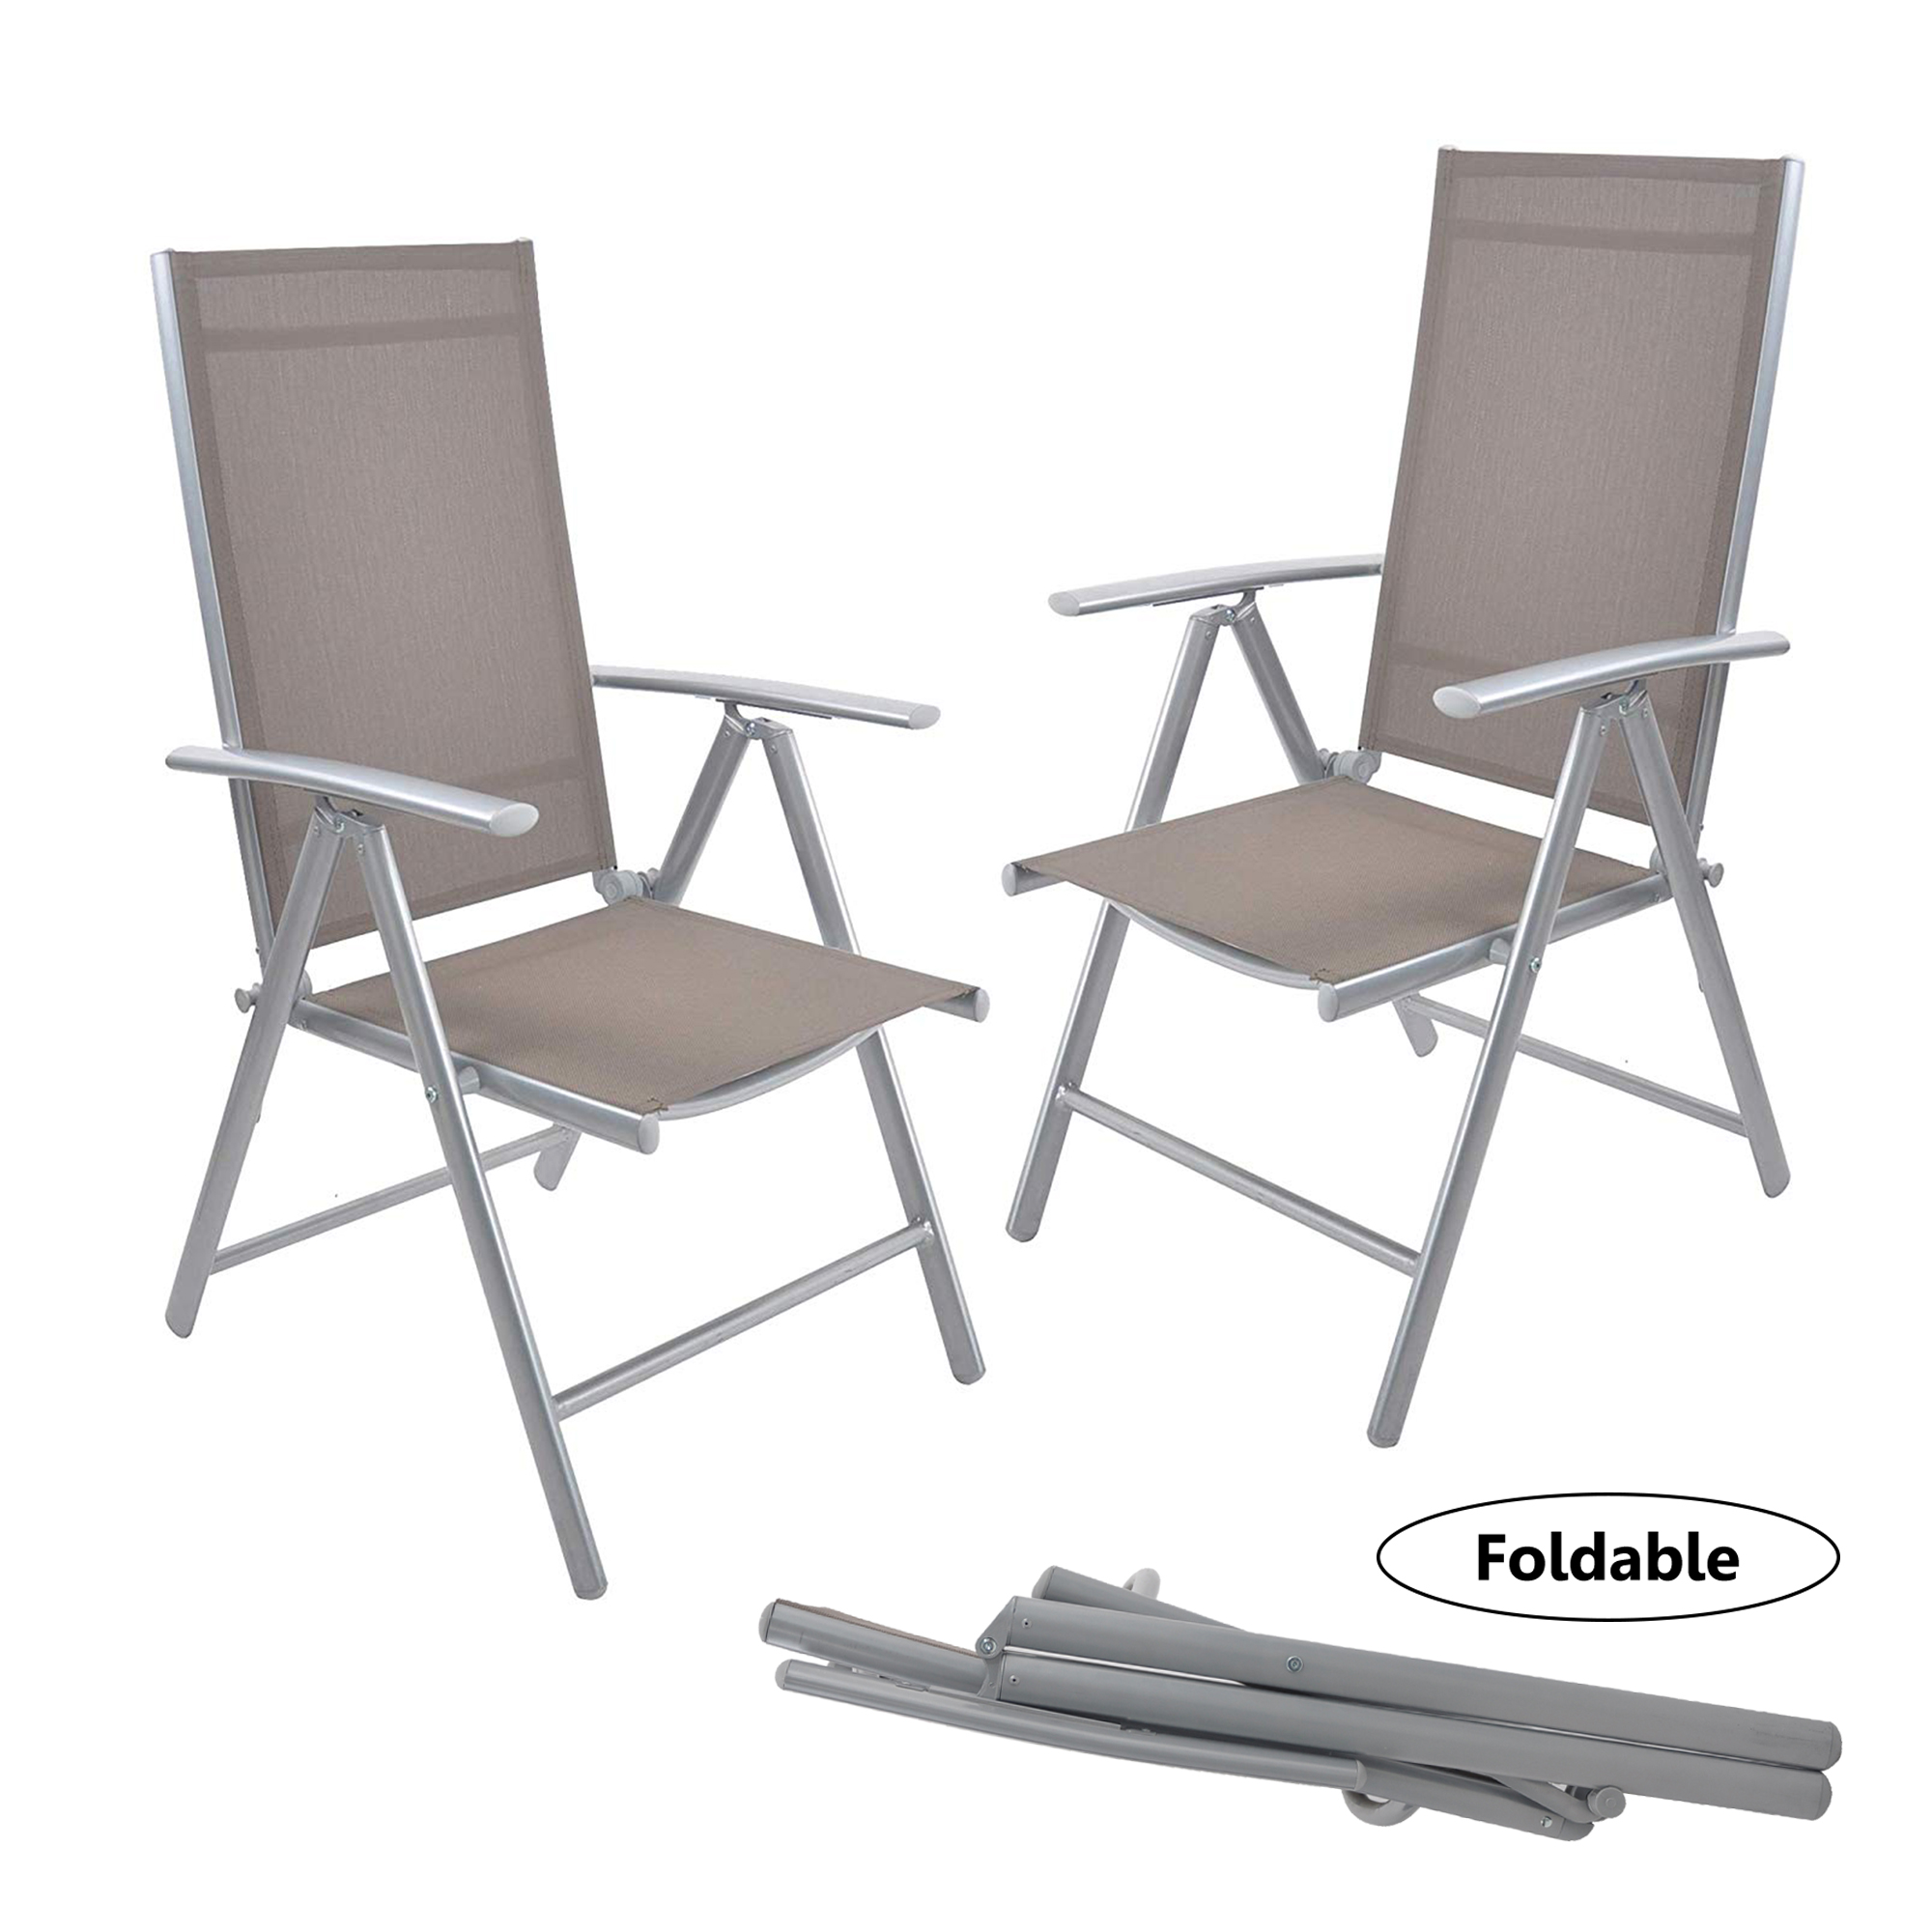 KARMAS PRODUCT 2 PCS Folding Chair Patio Outdoor Camp Beach Lounge Chairs with Arm Rest - 7 Position Lay Flat Adjustable Lightweight - image 1 of 7